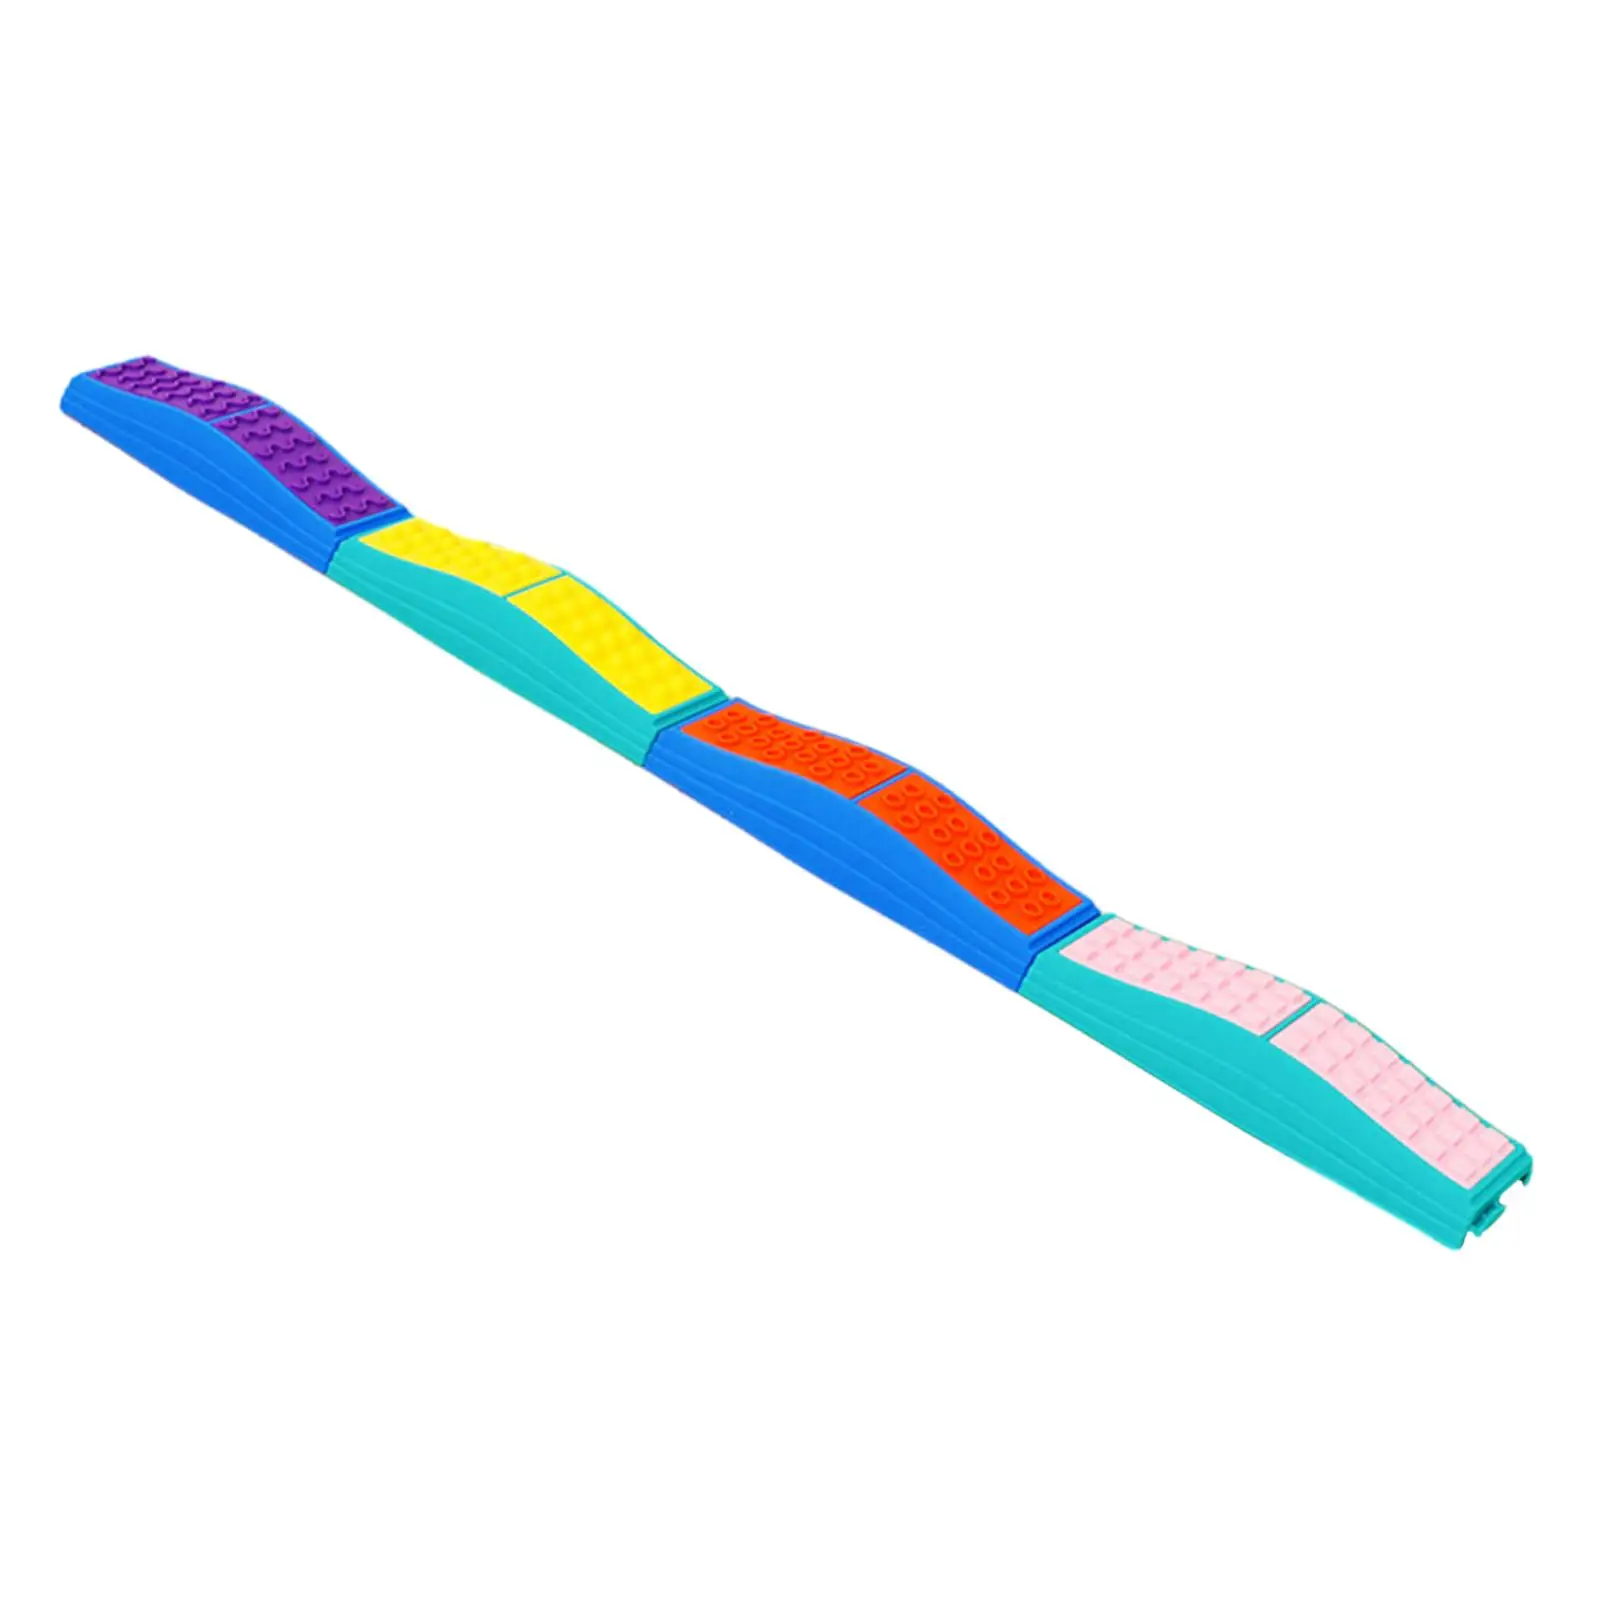 Colored Wavy Balance Beams Non Slip Textured Surface Promote Balance Strength Coordination Children Learning Toy Obstacle Course